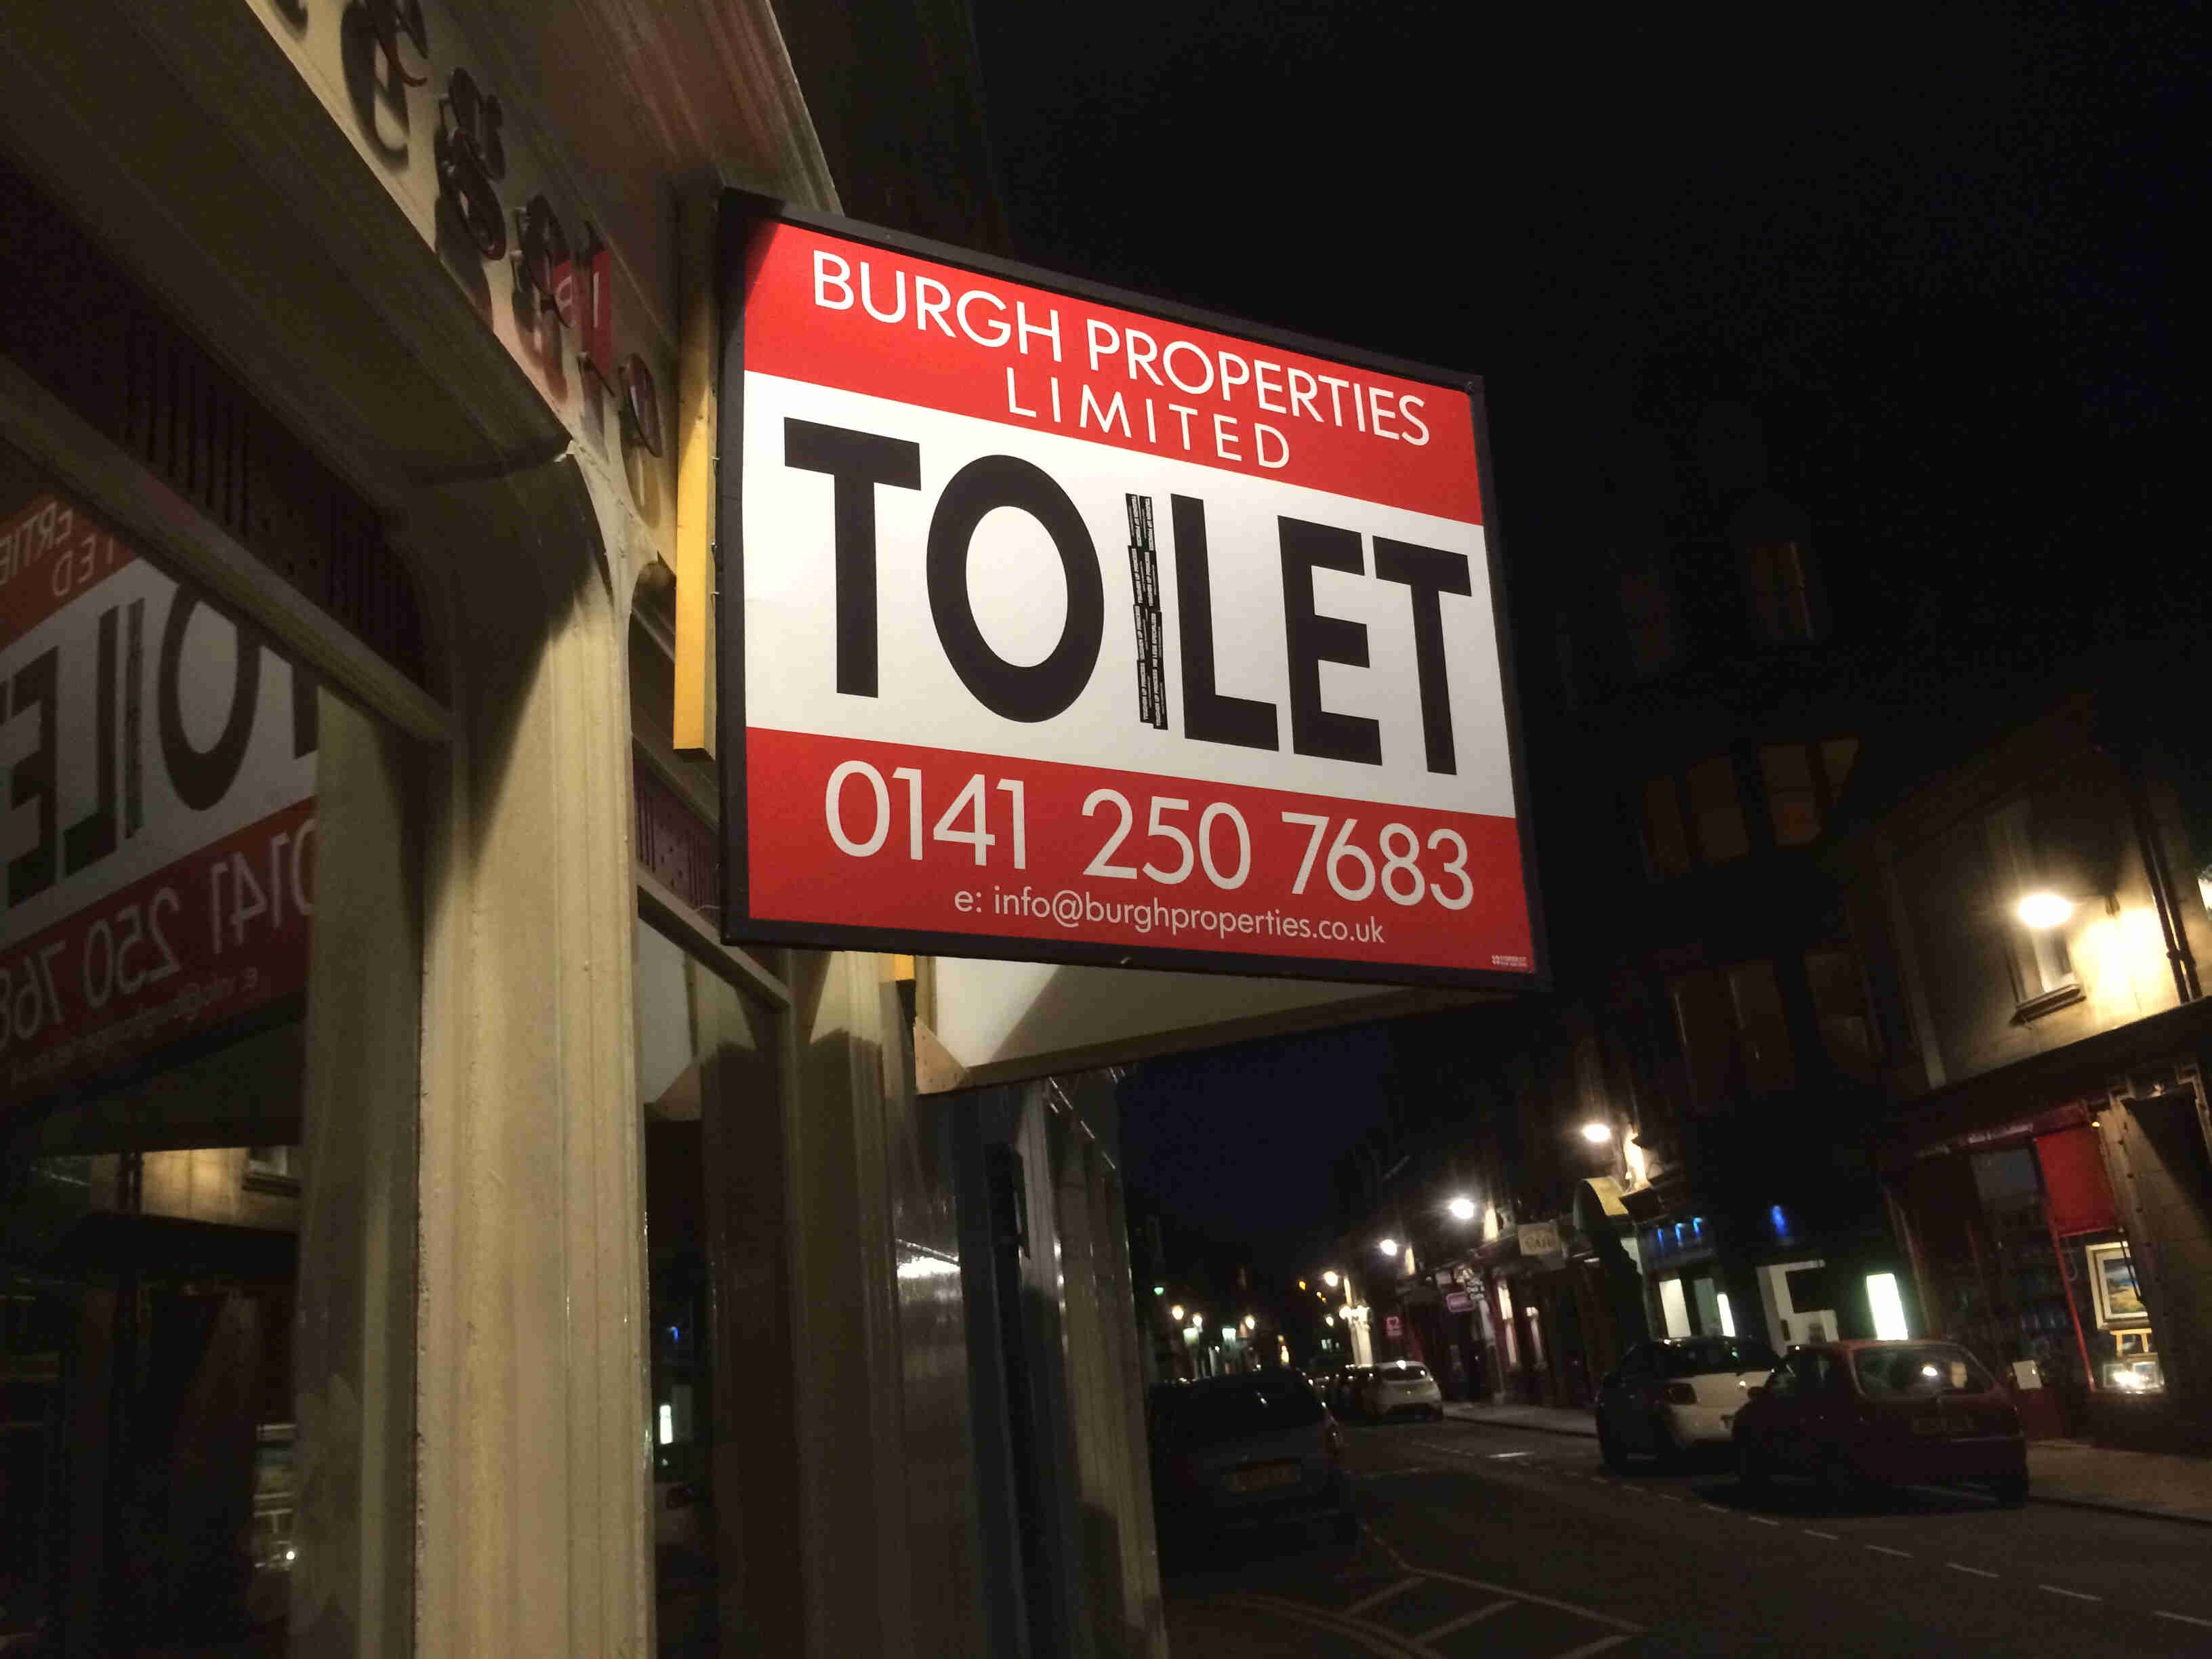 Side view of a sign showing, Burgh Properties Limited and TO LET, altered to show TOILET, on a building at night